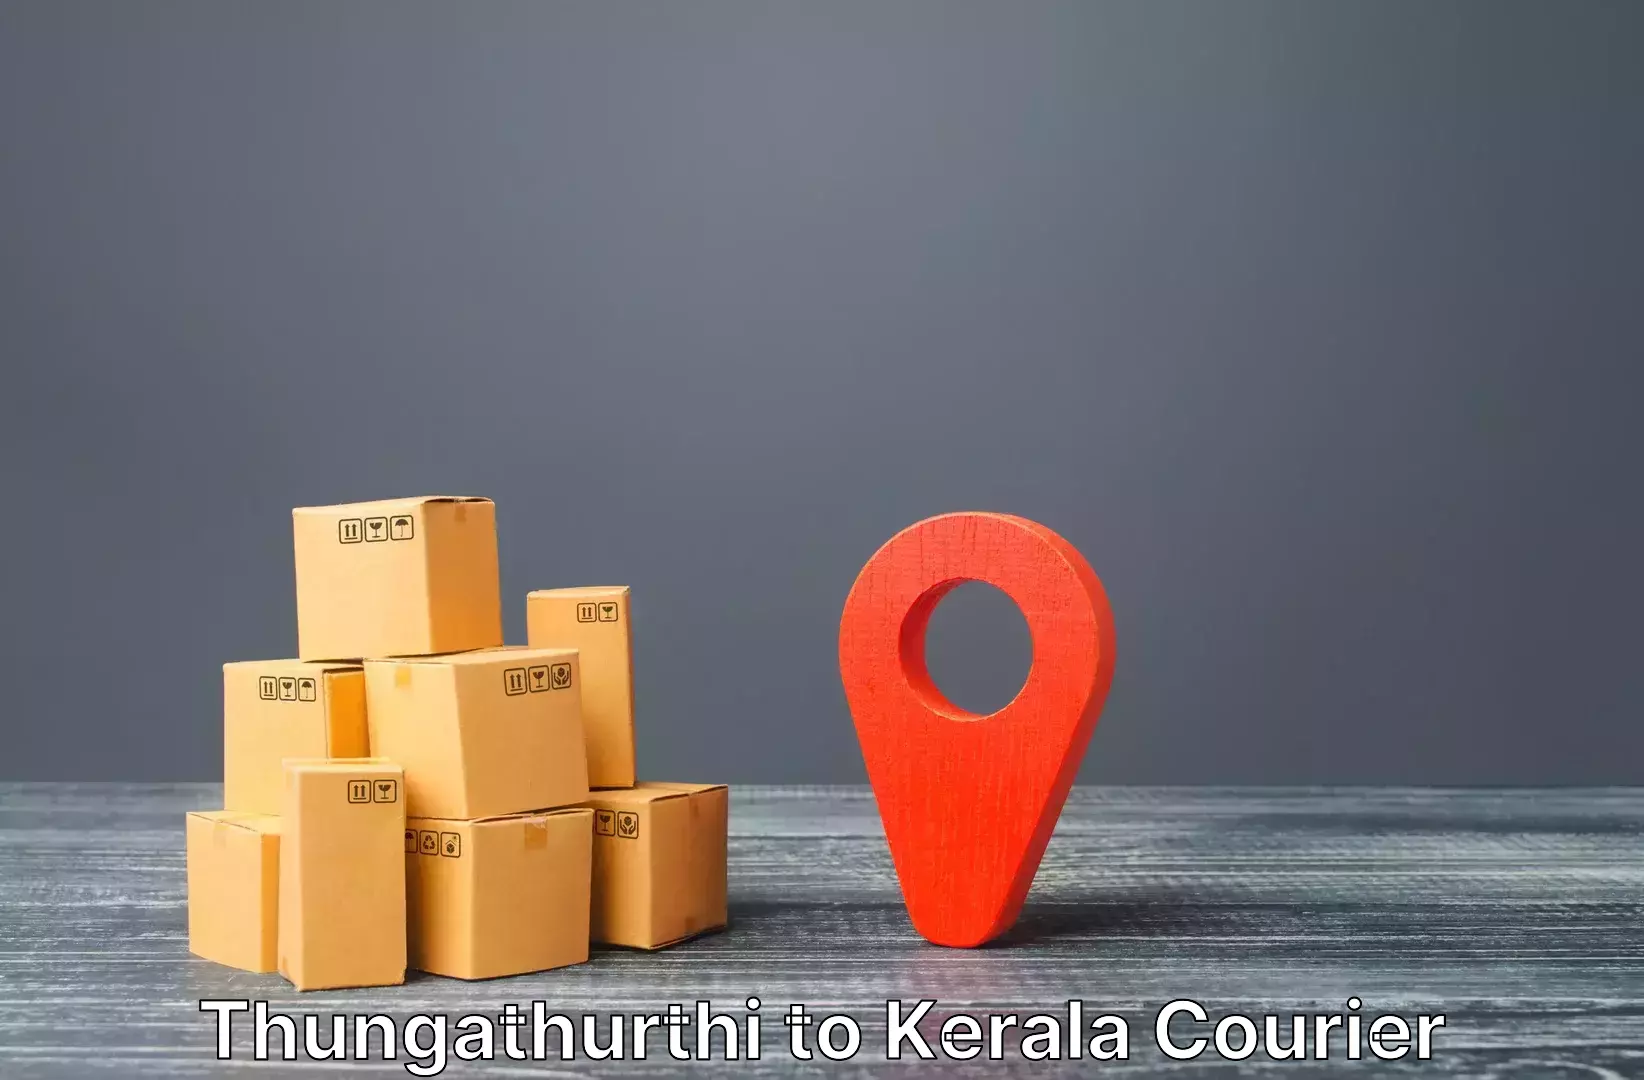 Baggage transport professionals Thungathurthi to Cochin University of Science and Technology